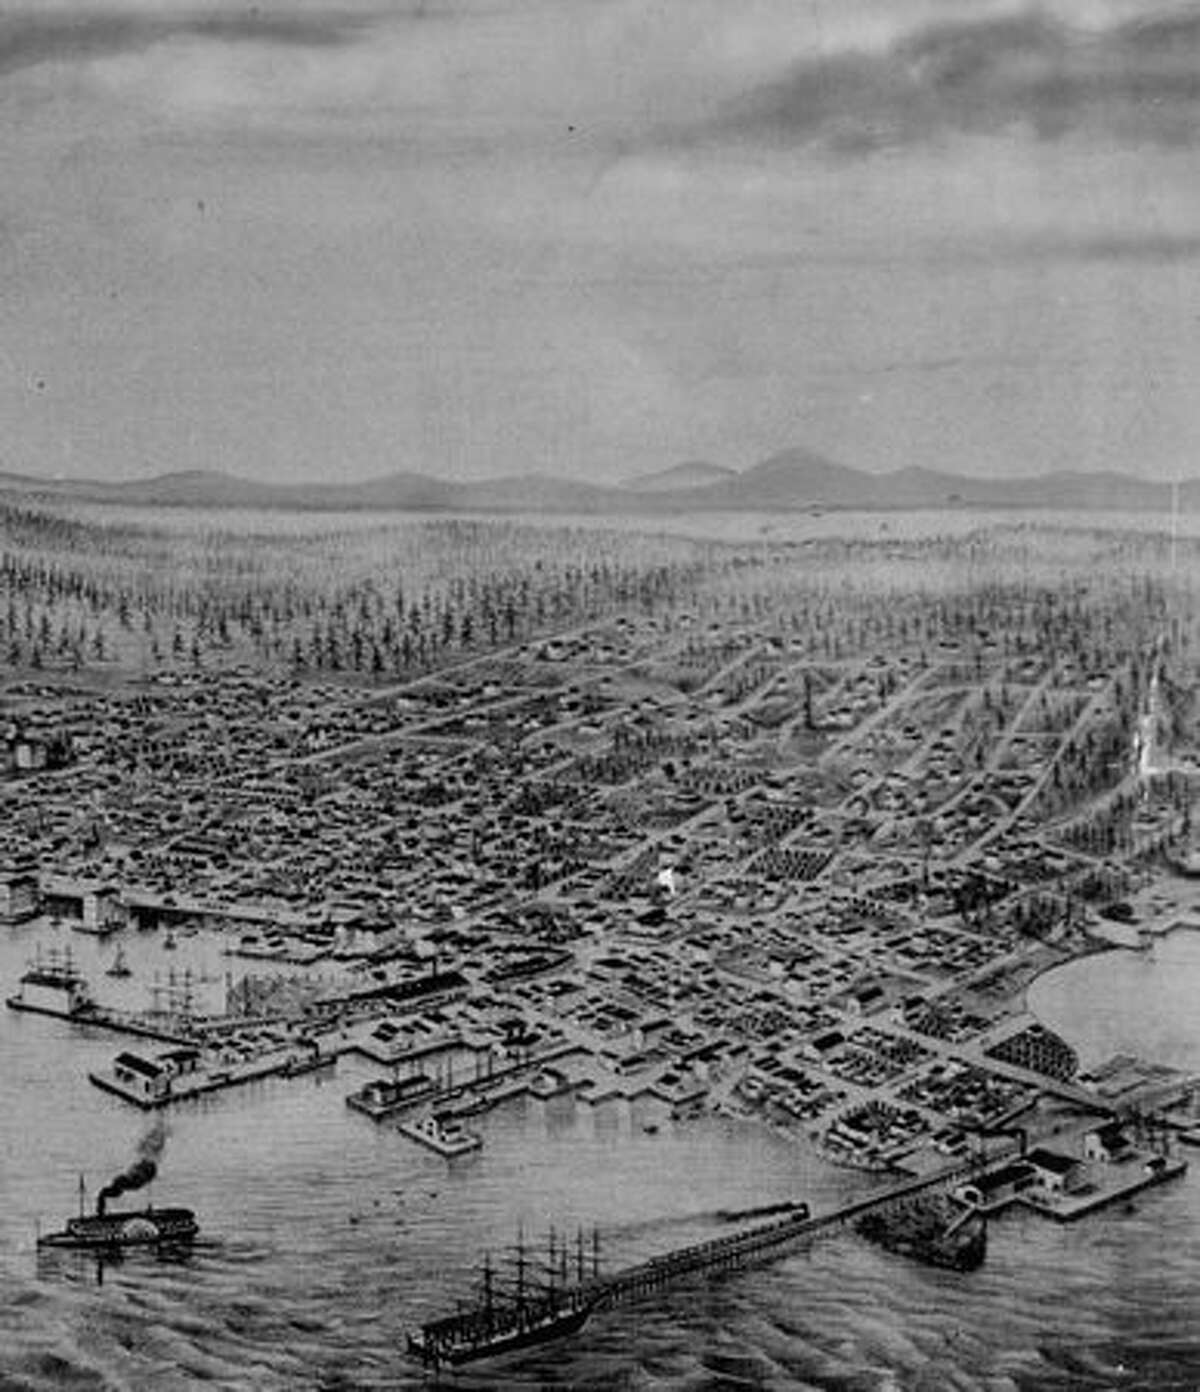 This photo caption indicates it's an 1878 view of Seattle.